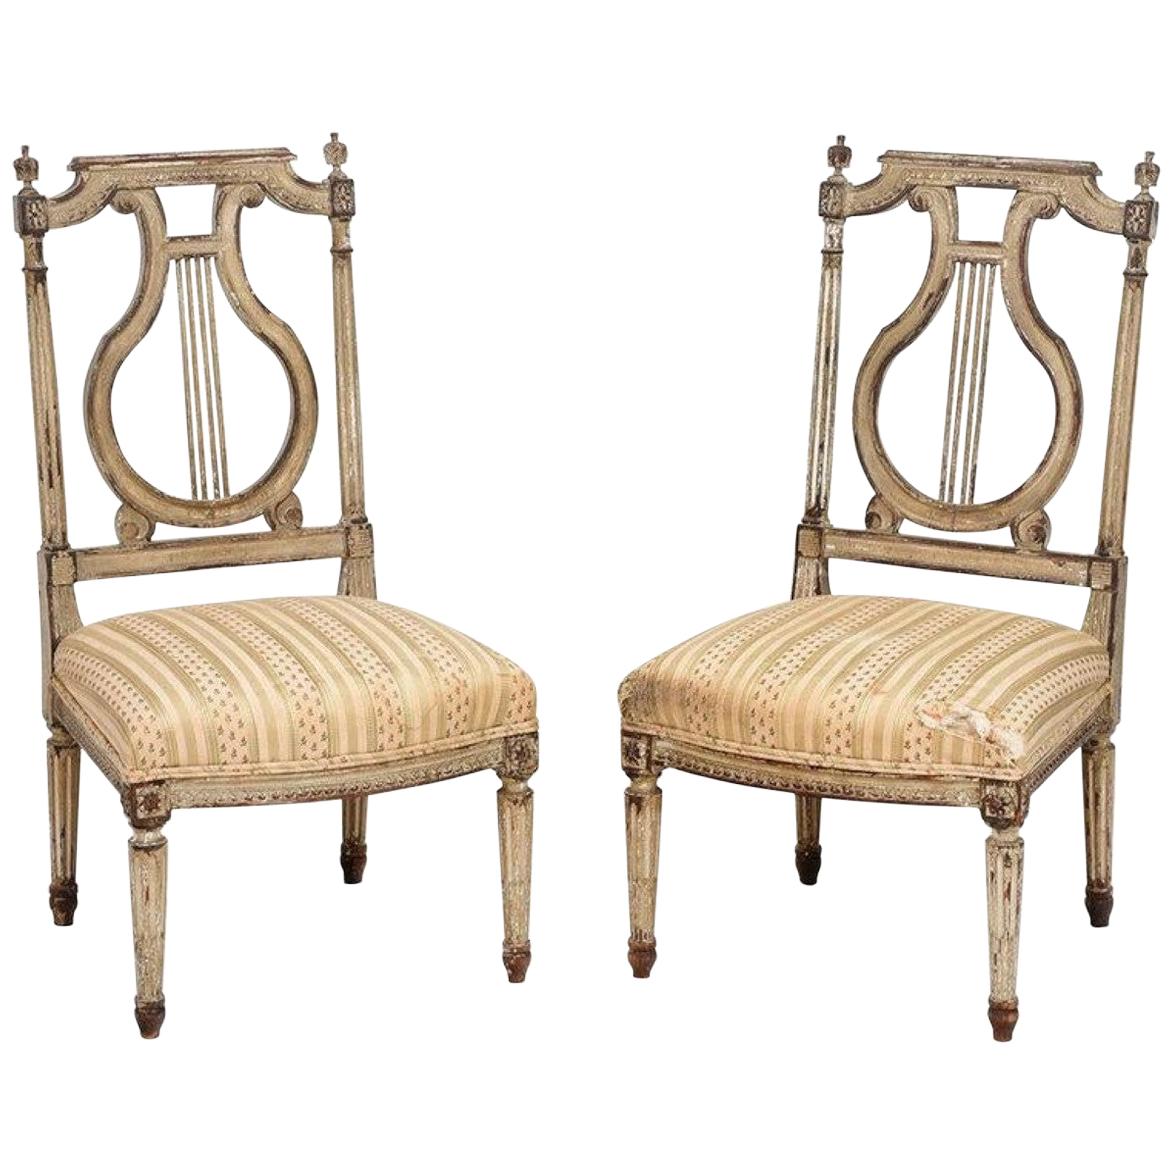 Pair of 18th Century French "Chauffeuse" Chairs, Georges Jacob Attributed